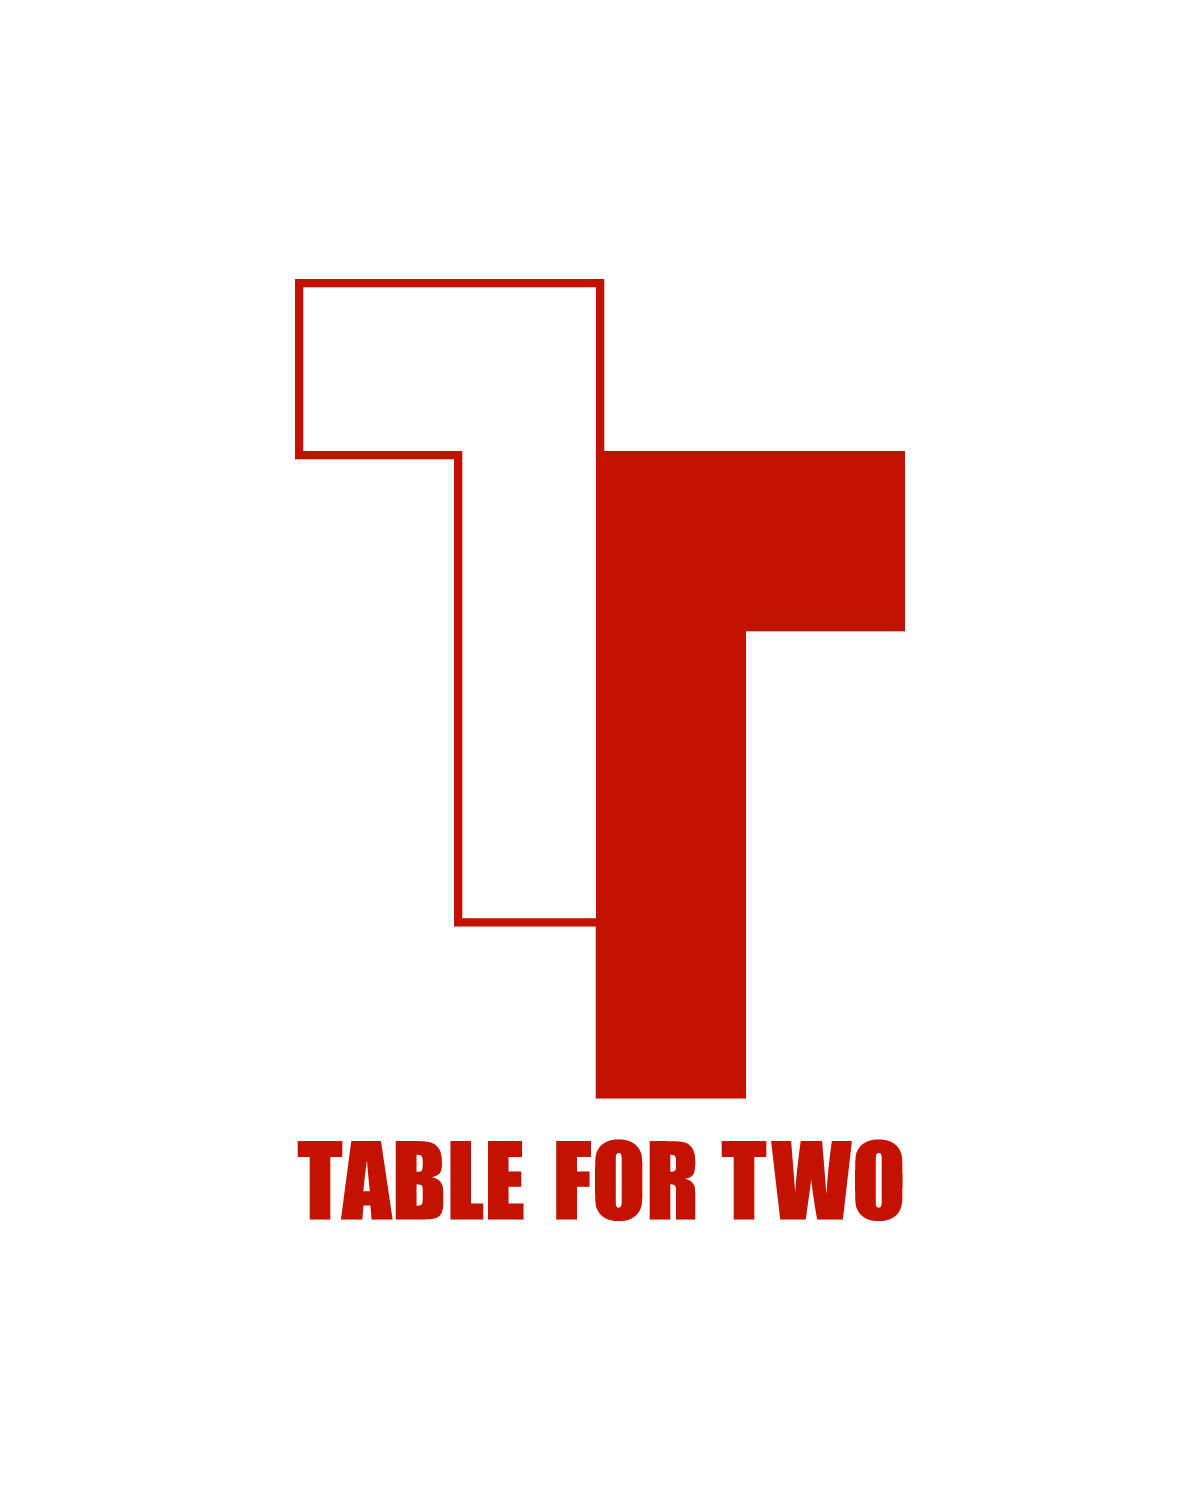 TABLE FOR TWO USA logo